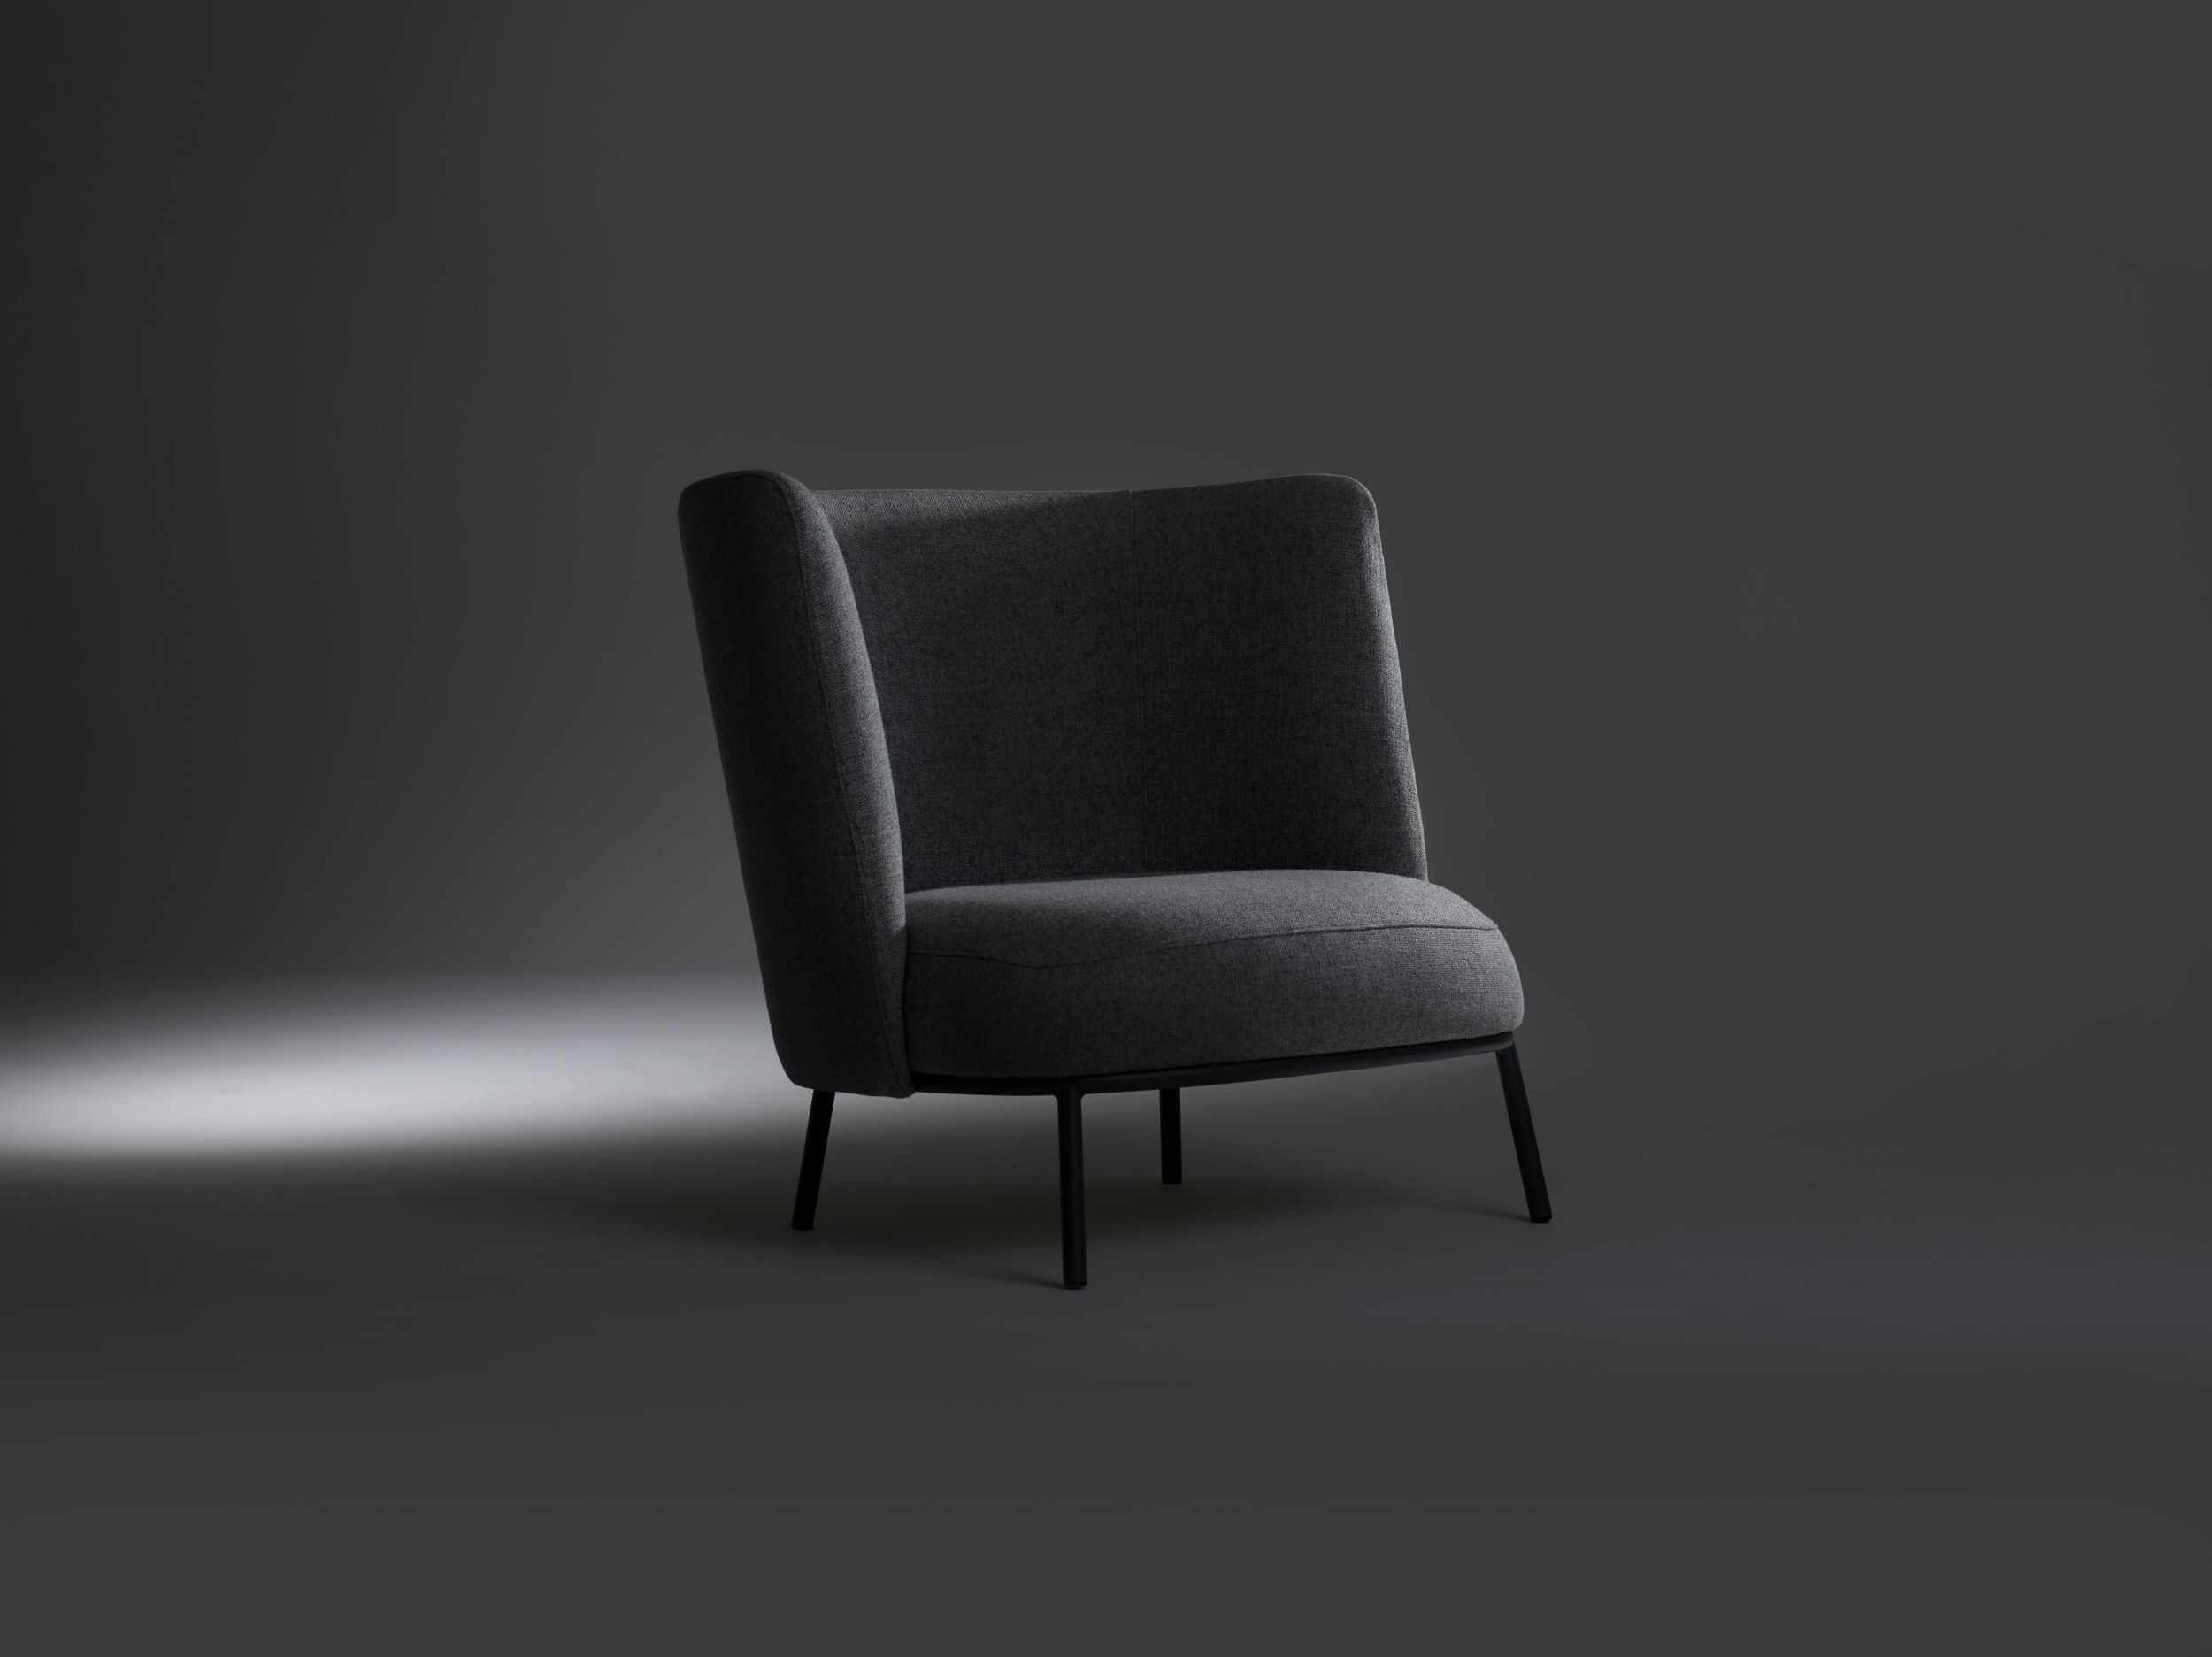 Shift easychair high and ottoman by Debiasi Sandri for Offecct